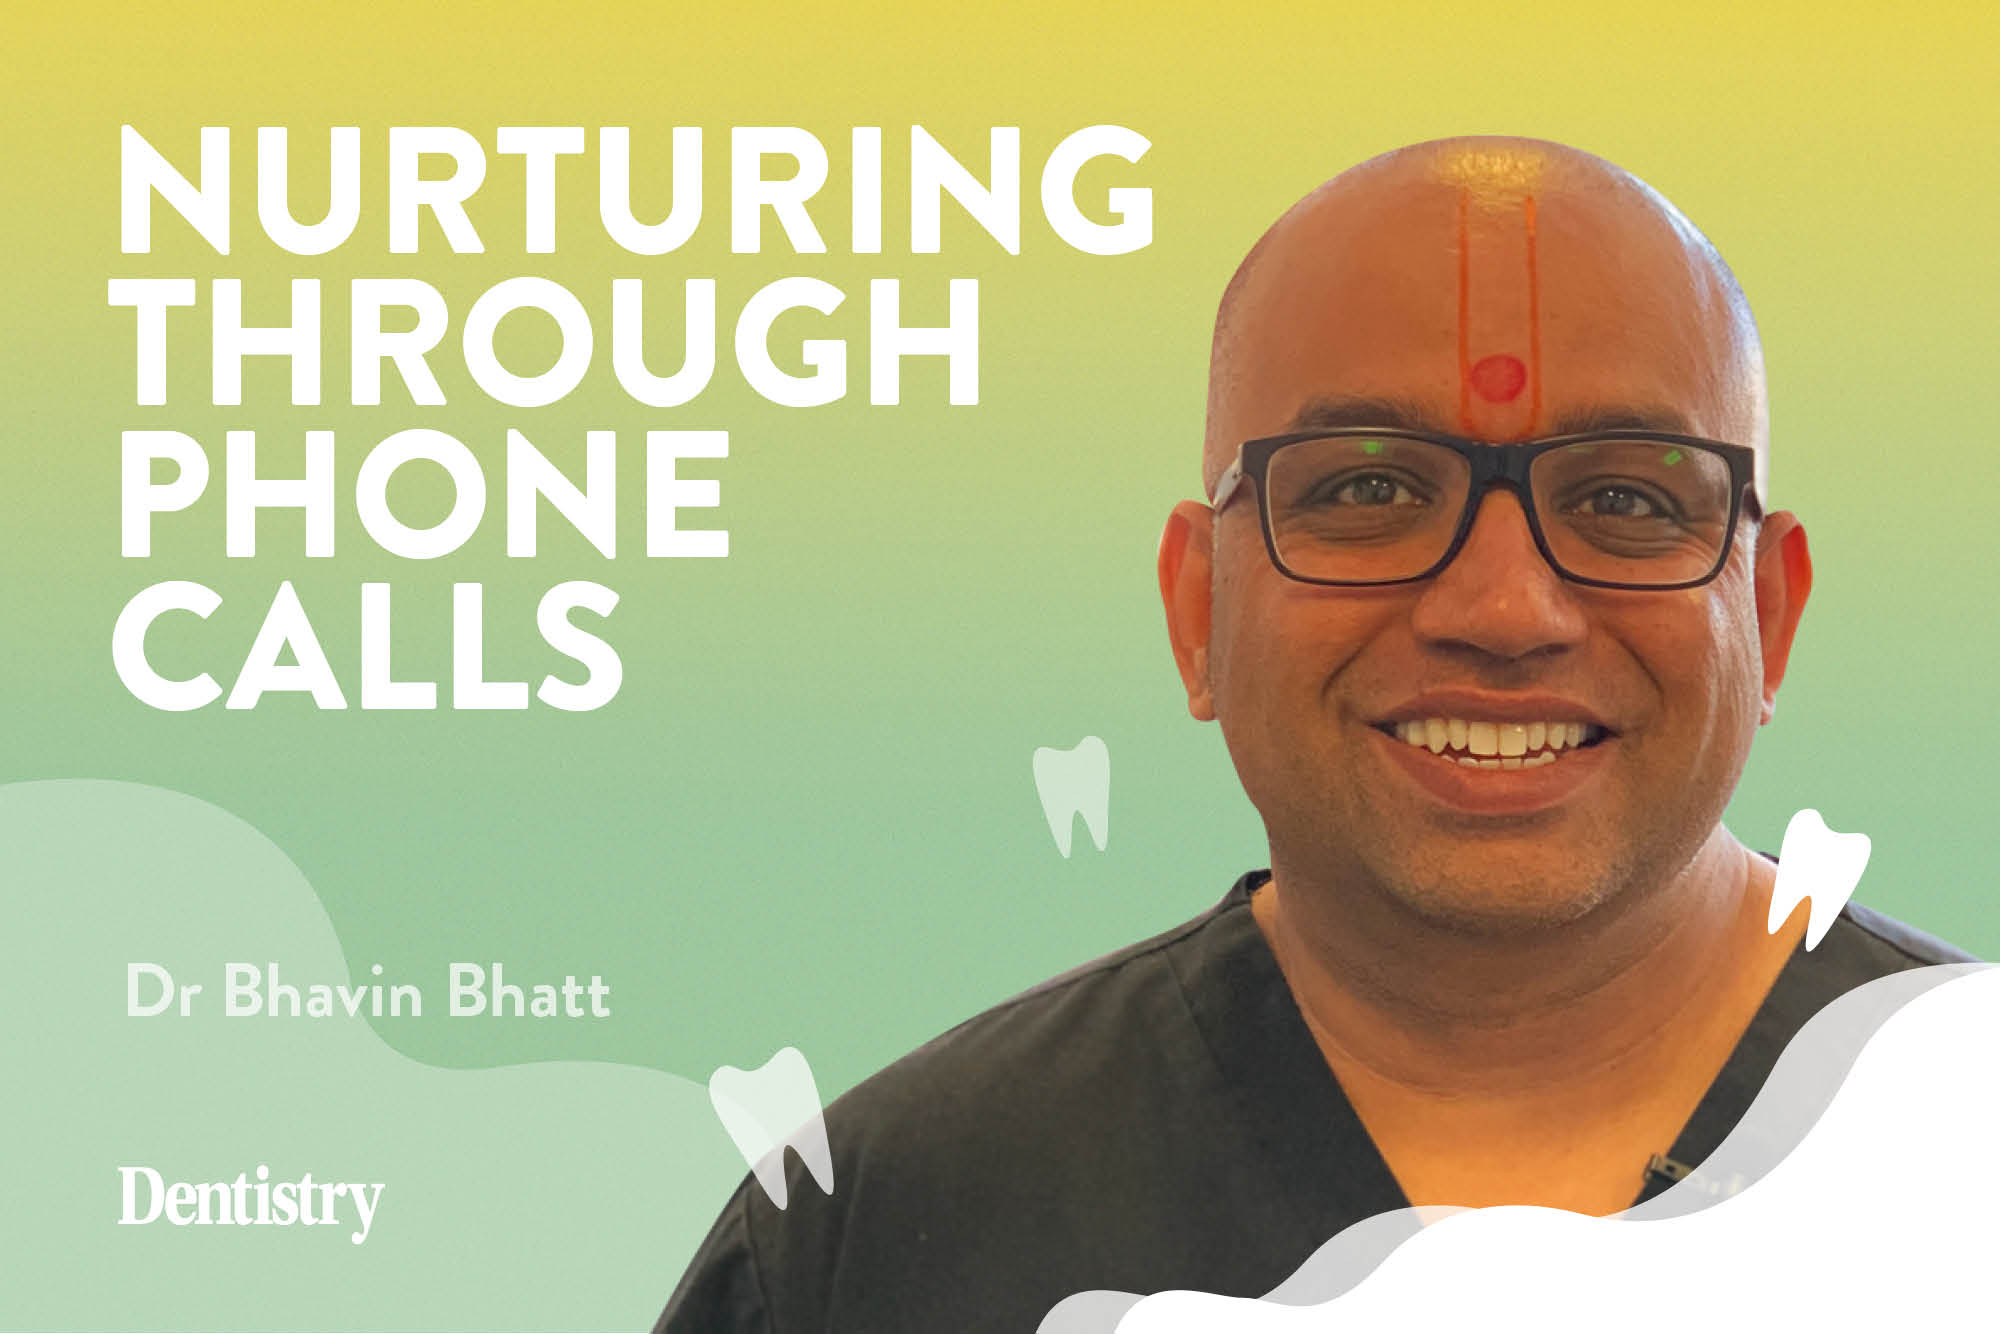 This month Bhavin Bhatt discusses the skill of phone call nurturing and the benefits of mastering it for aligner treatment.